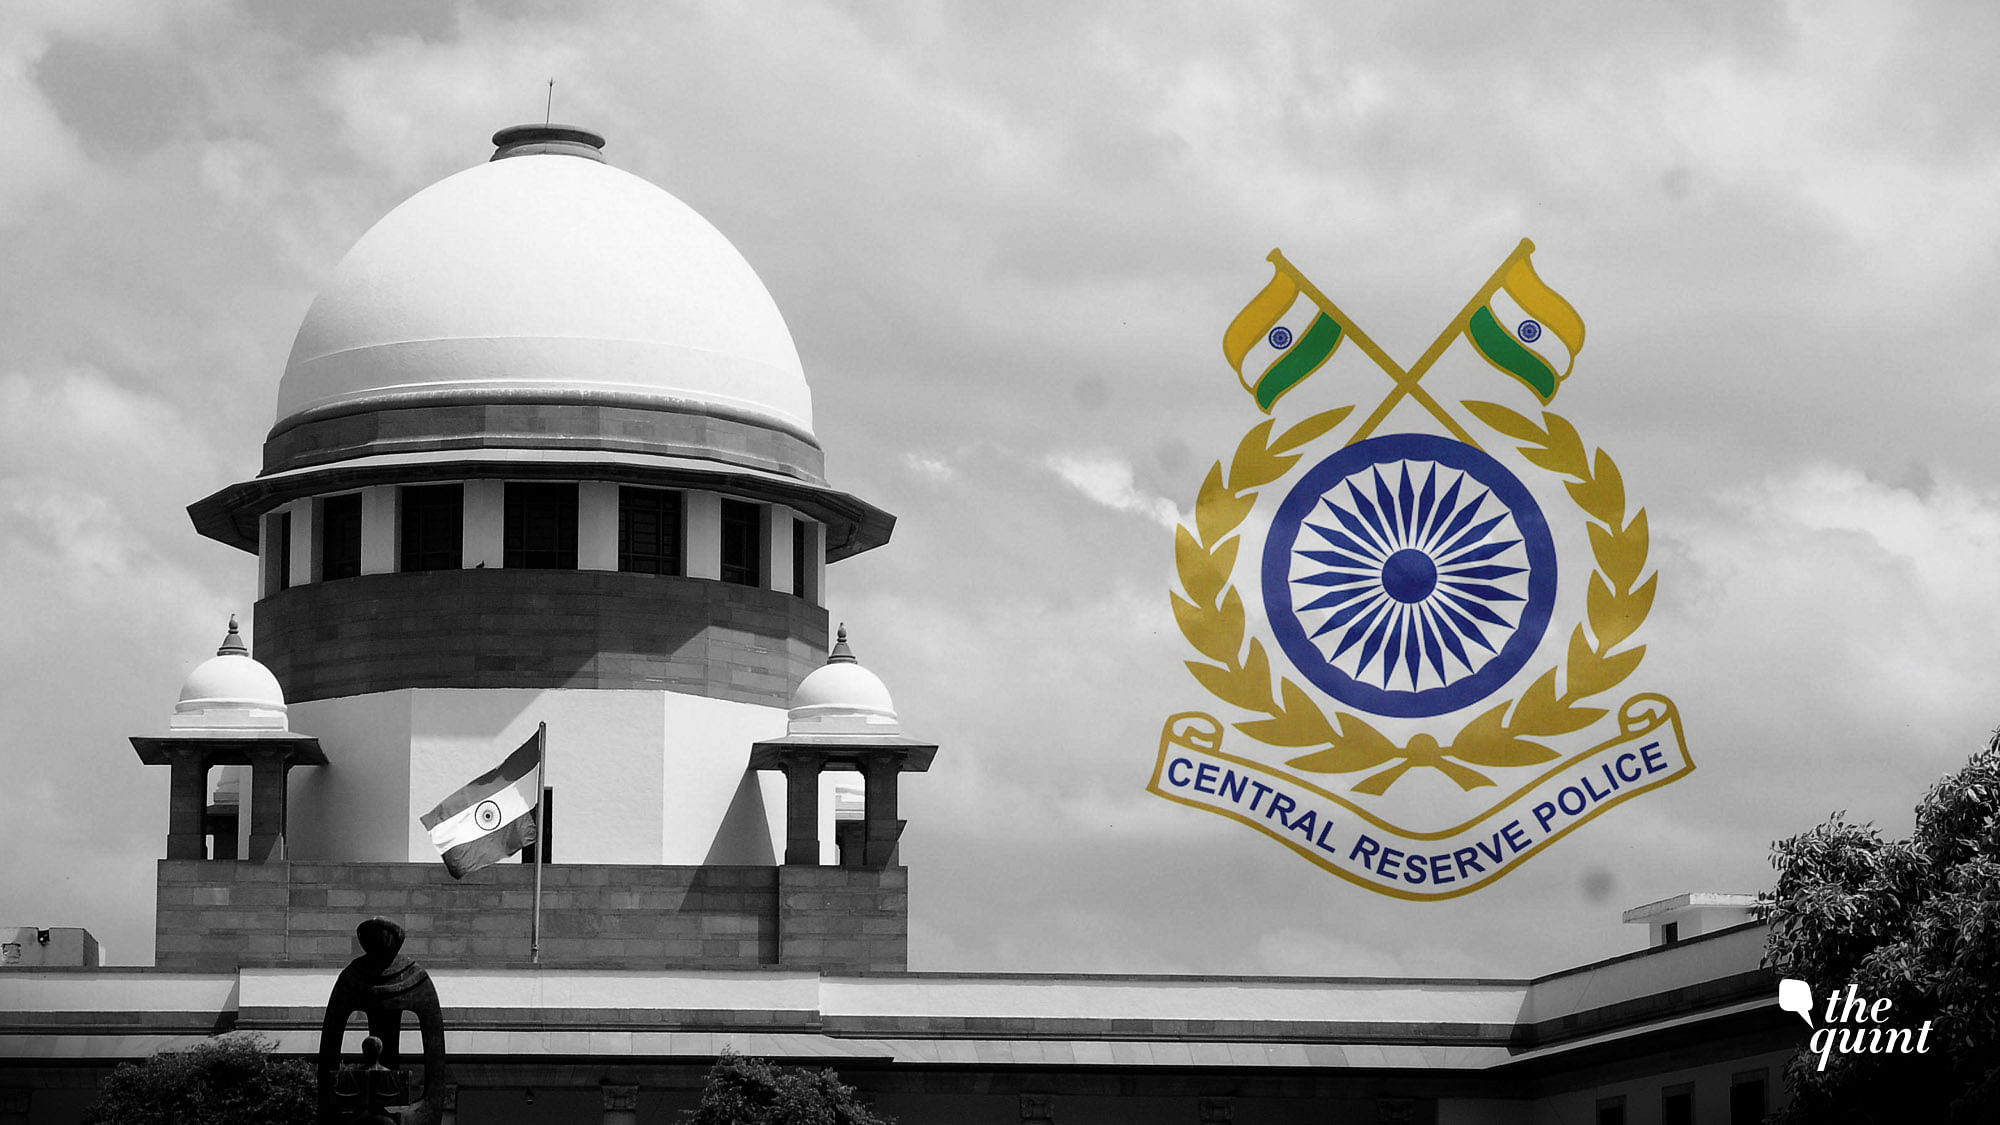 On 5 February 2019, the Supreme Court had granted the request by CRPF and other CAPF officers to get a pay upgrade.